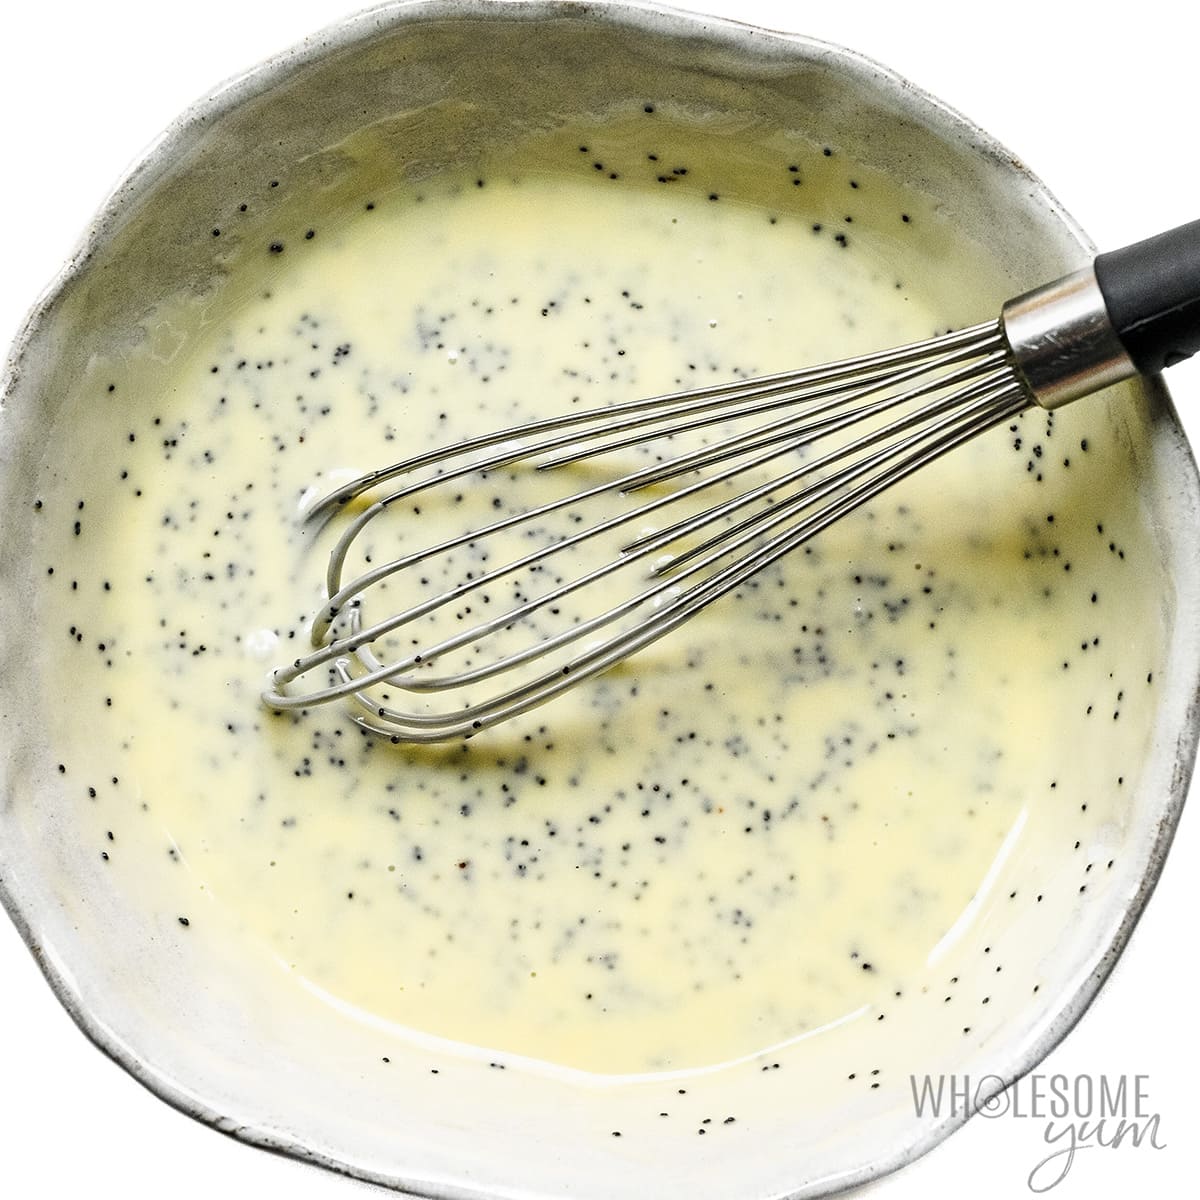 Poppy seed salad dressing whisked in a bowl.